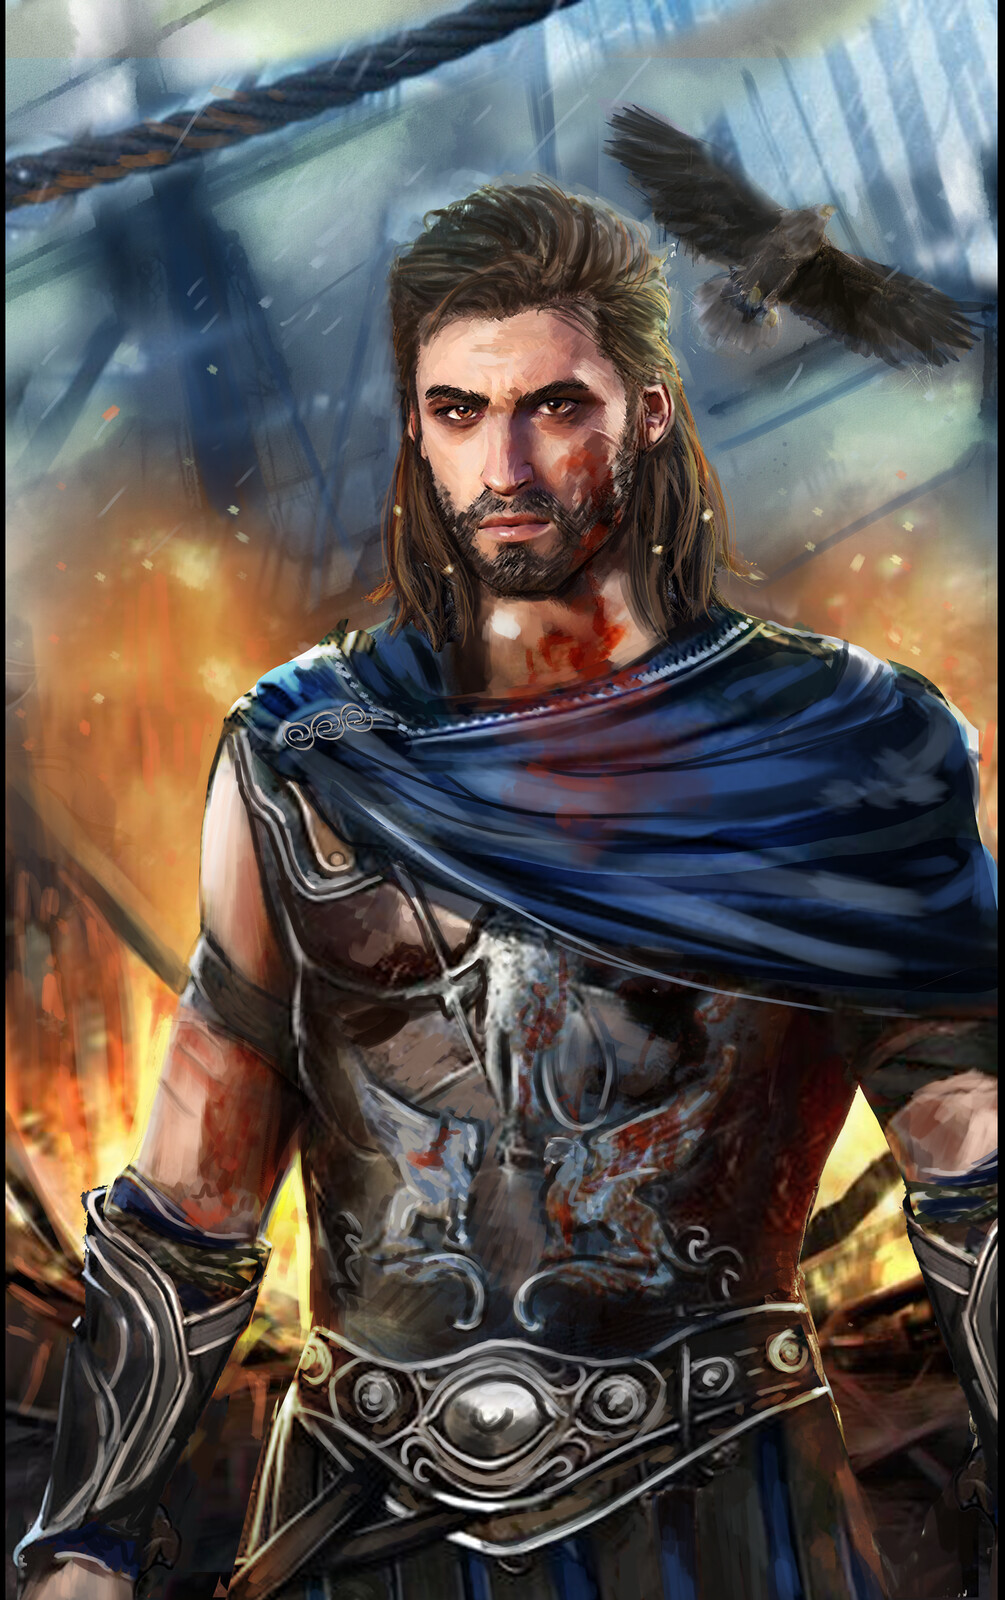 It's my Fan art of Alexios from Assassin's Creed Odyssey. 